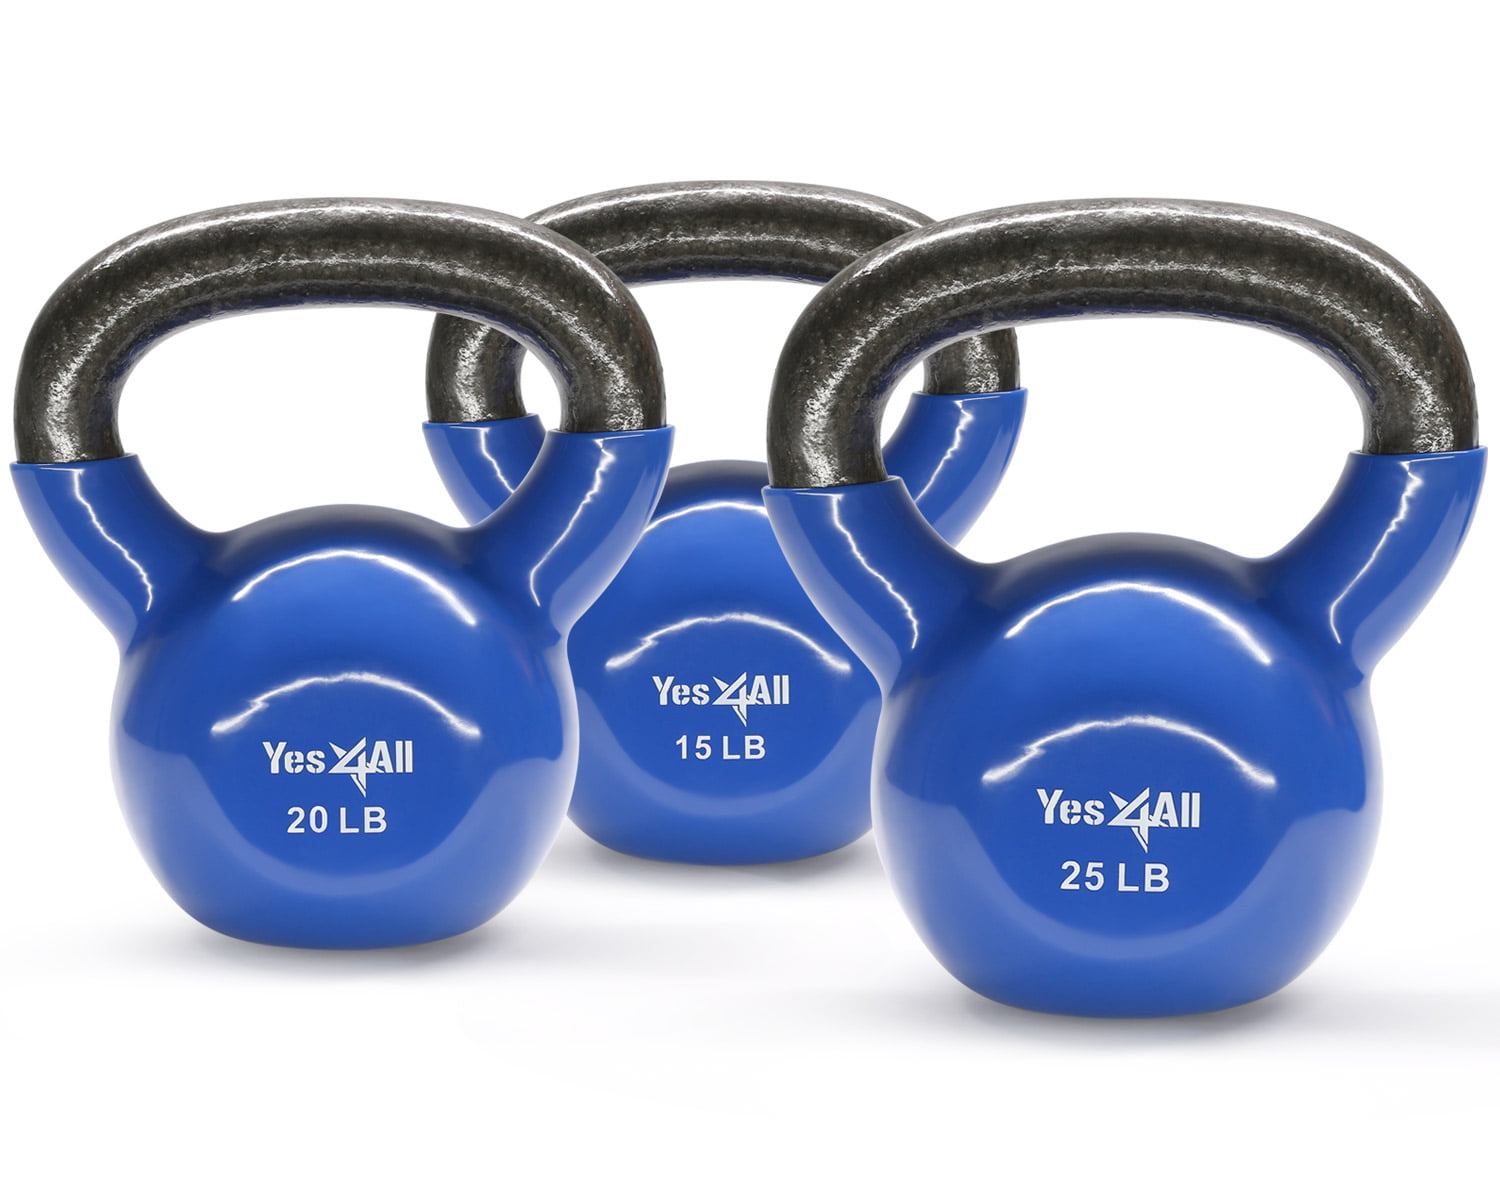 Home Exercise MMA Training Yes4All Single Vinyl Coated Kettlebell for Cross Training Fitness Workout